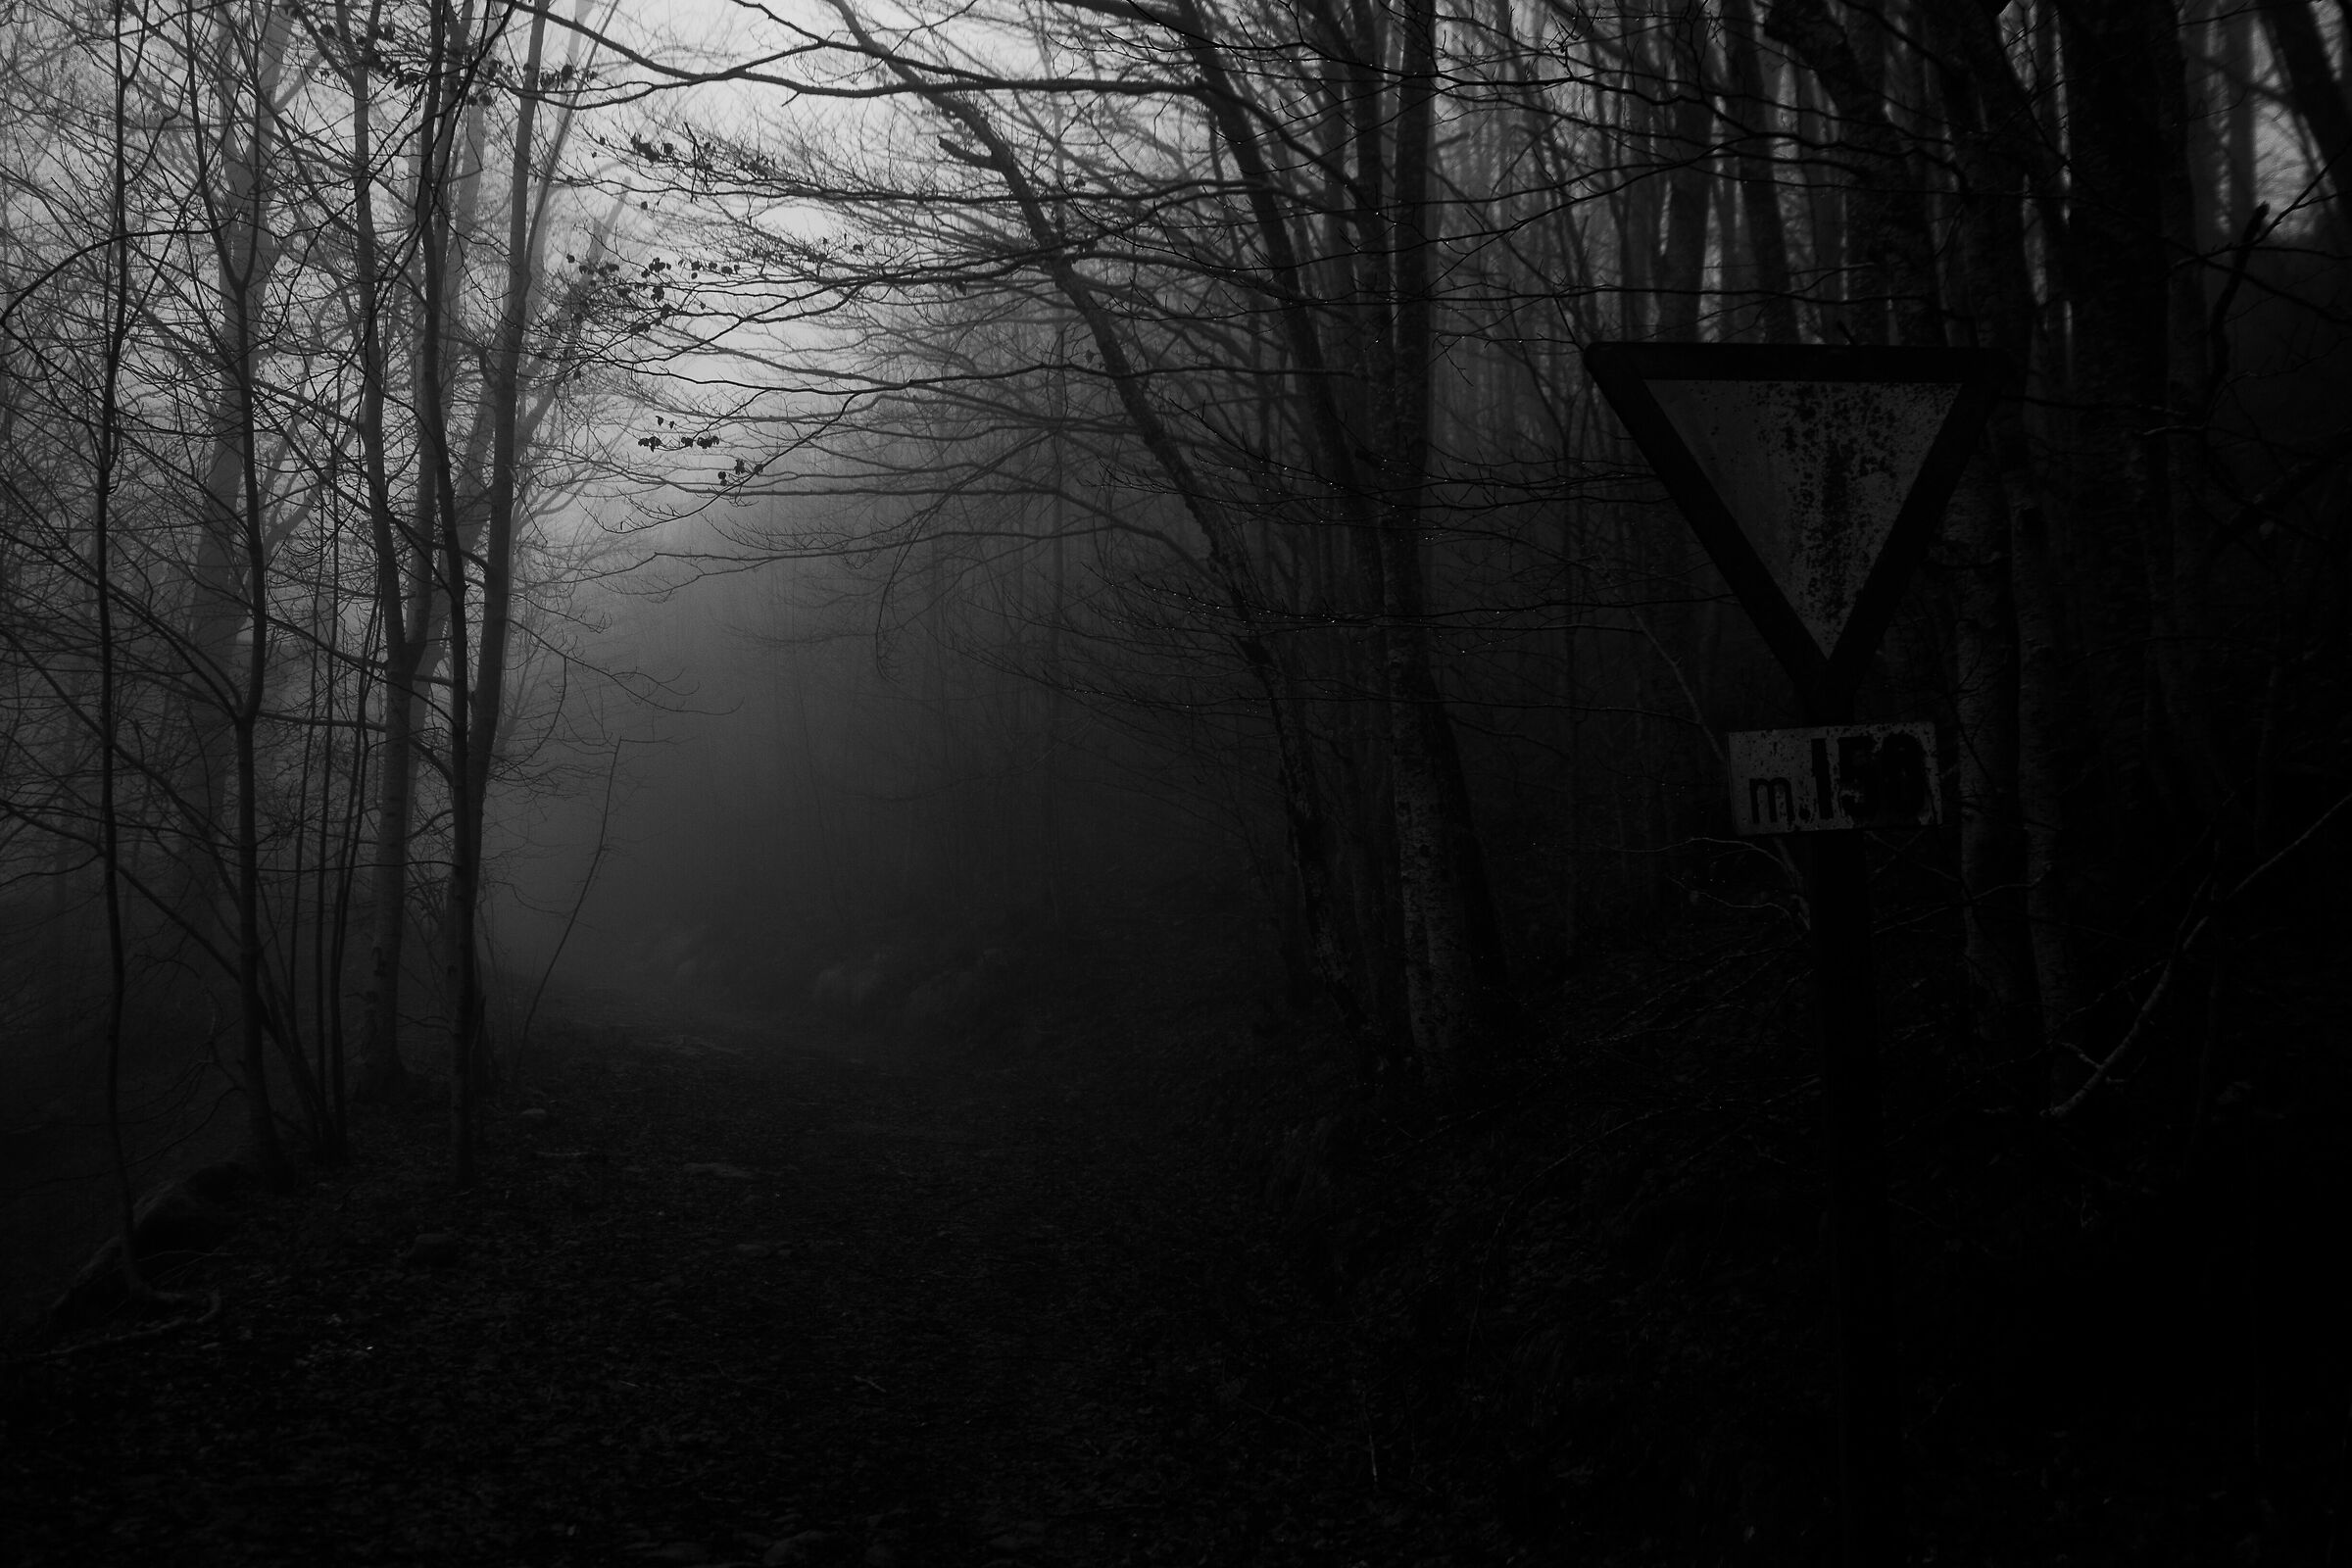 In the woods of Fiumalbo, in black and white...